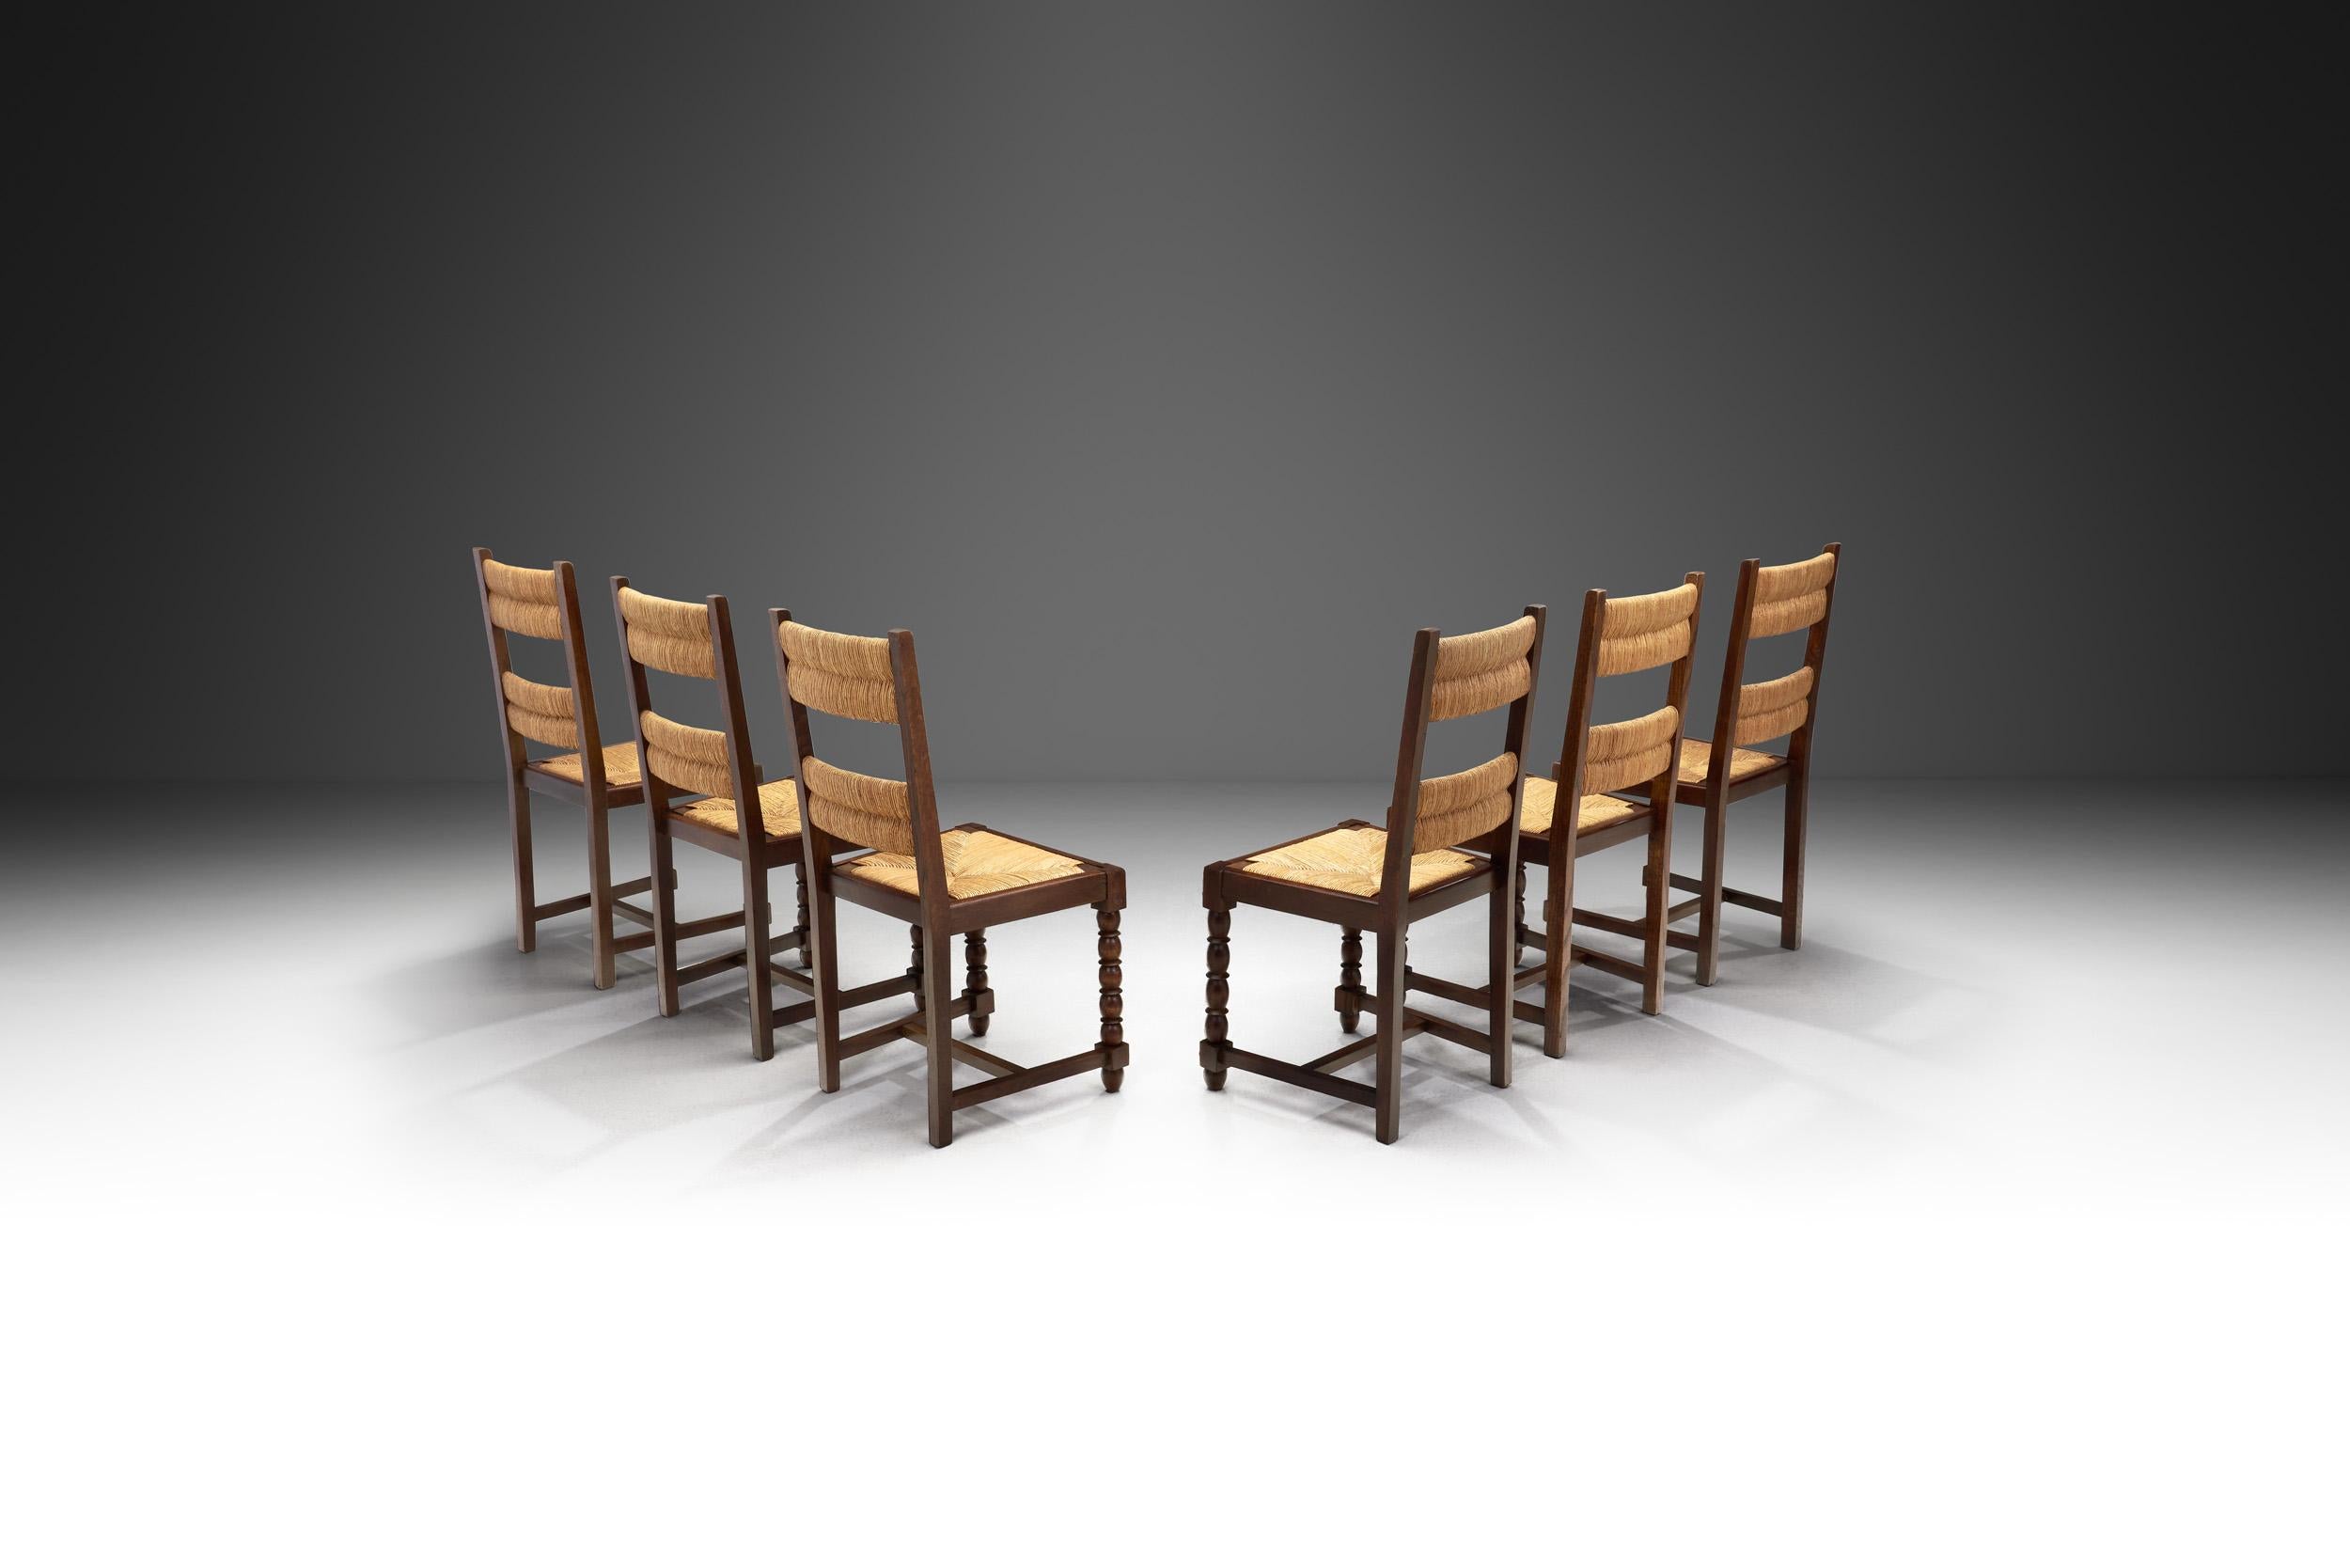 European A Set of Six Cane and Wood Chairs with Sculptural Legs, Europe ca 1940s For Sale